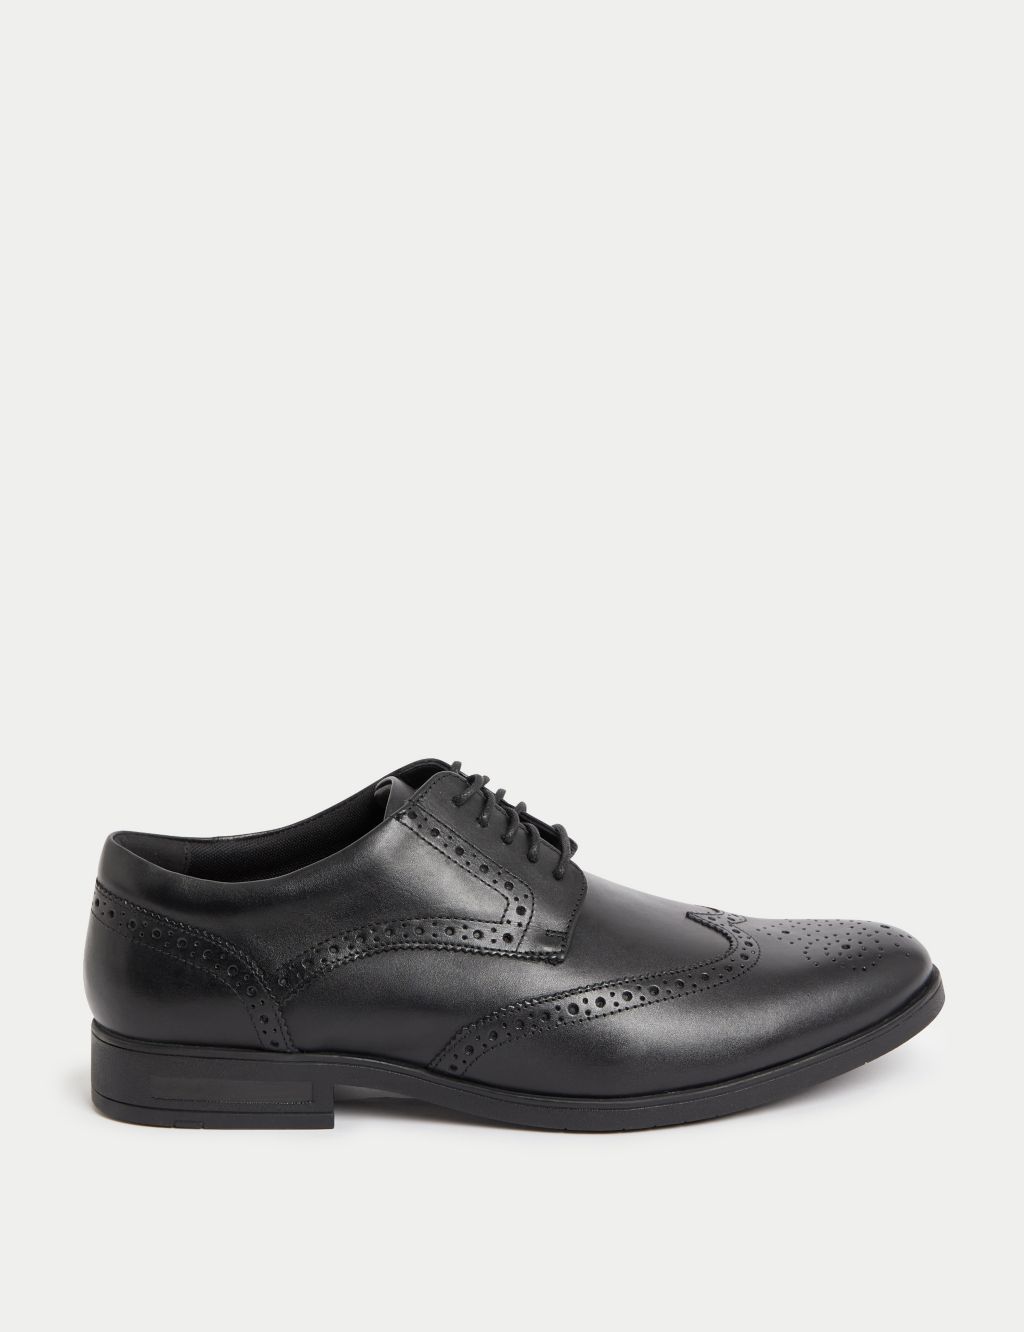 Wide Fit Airflex™ Leather Brogues image 1